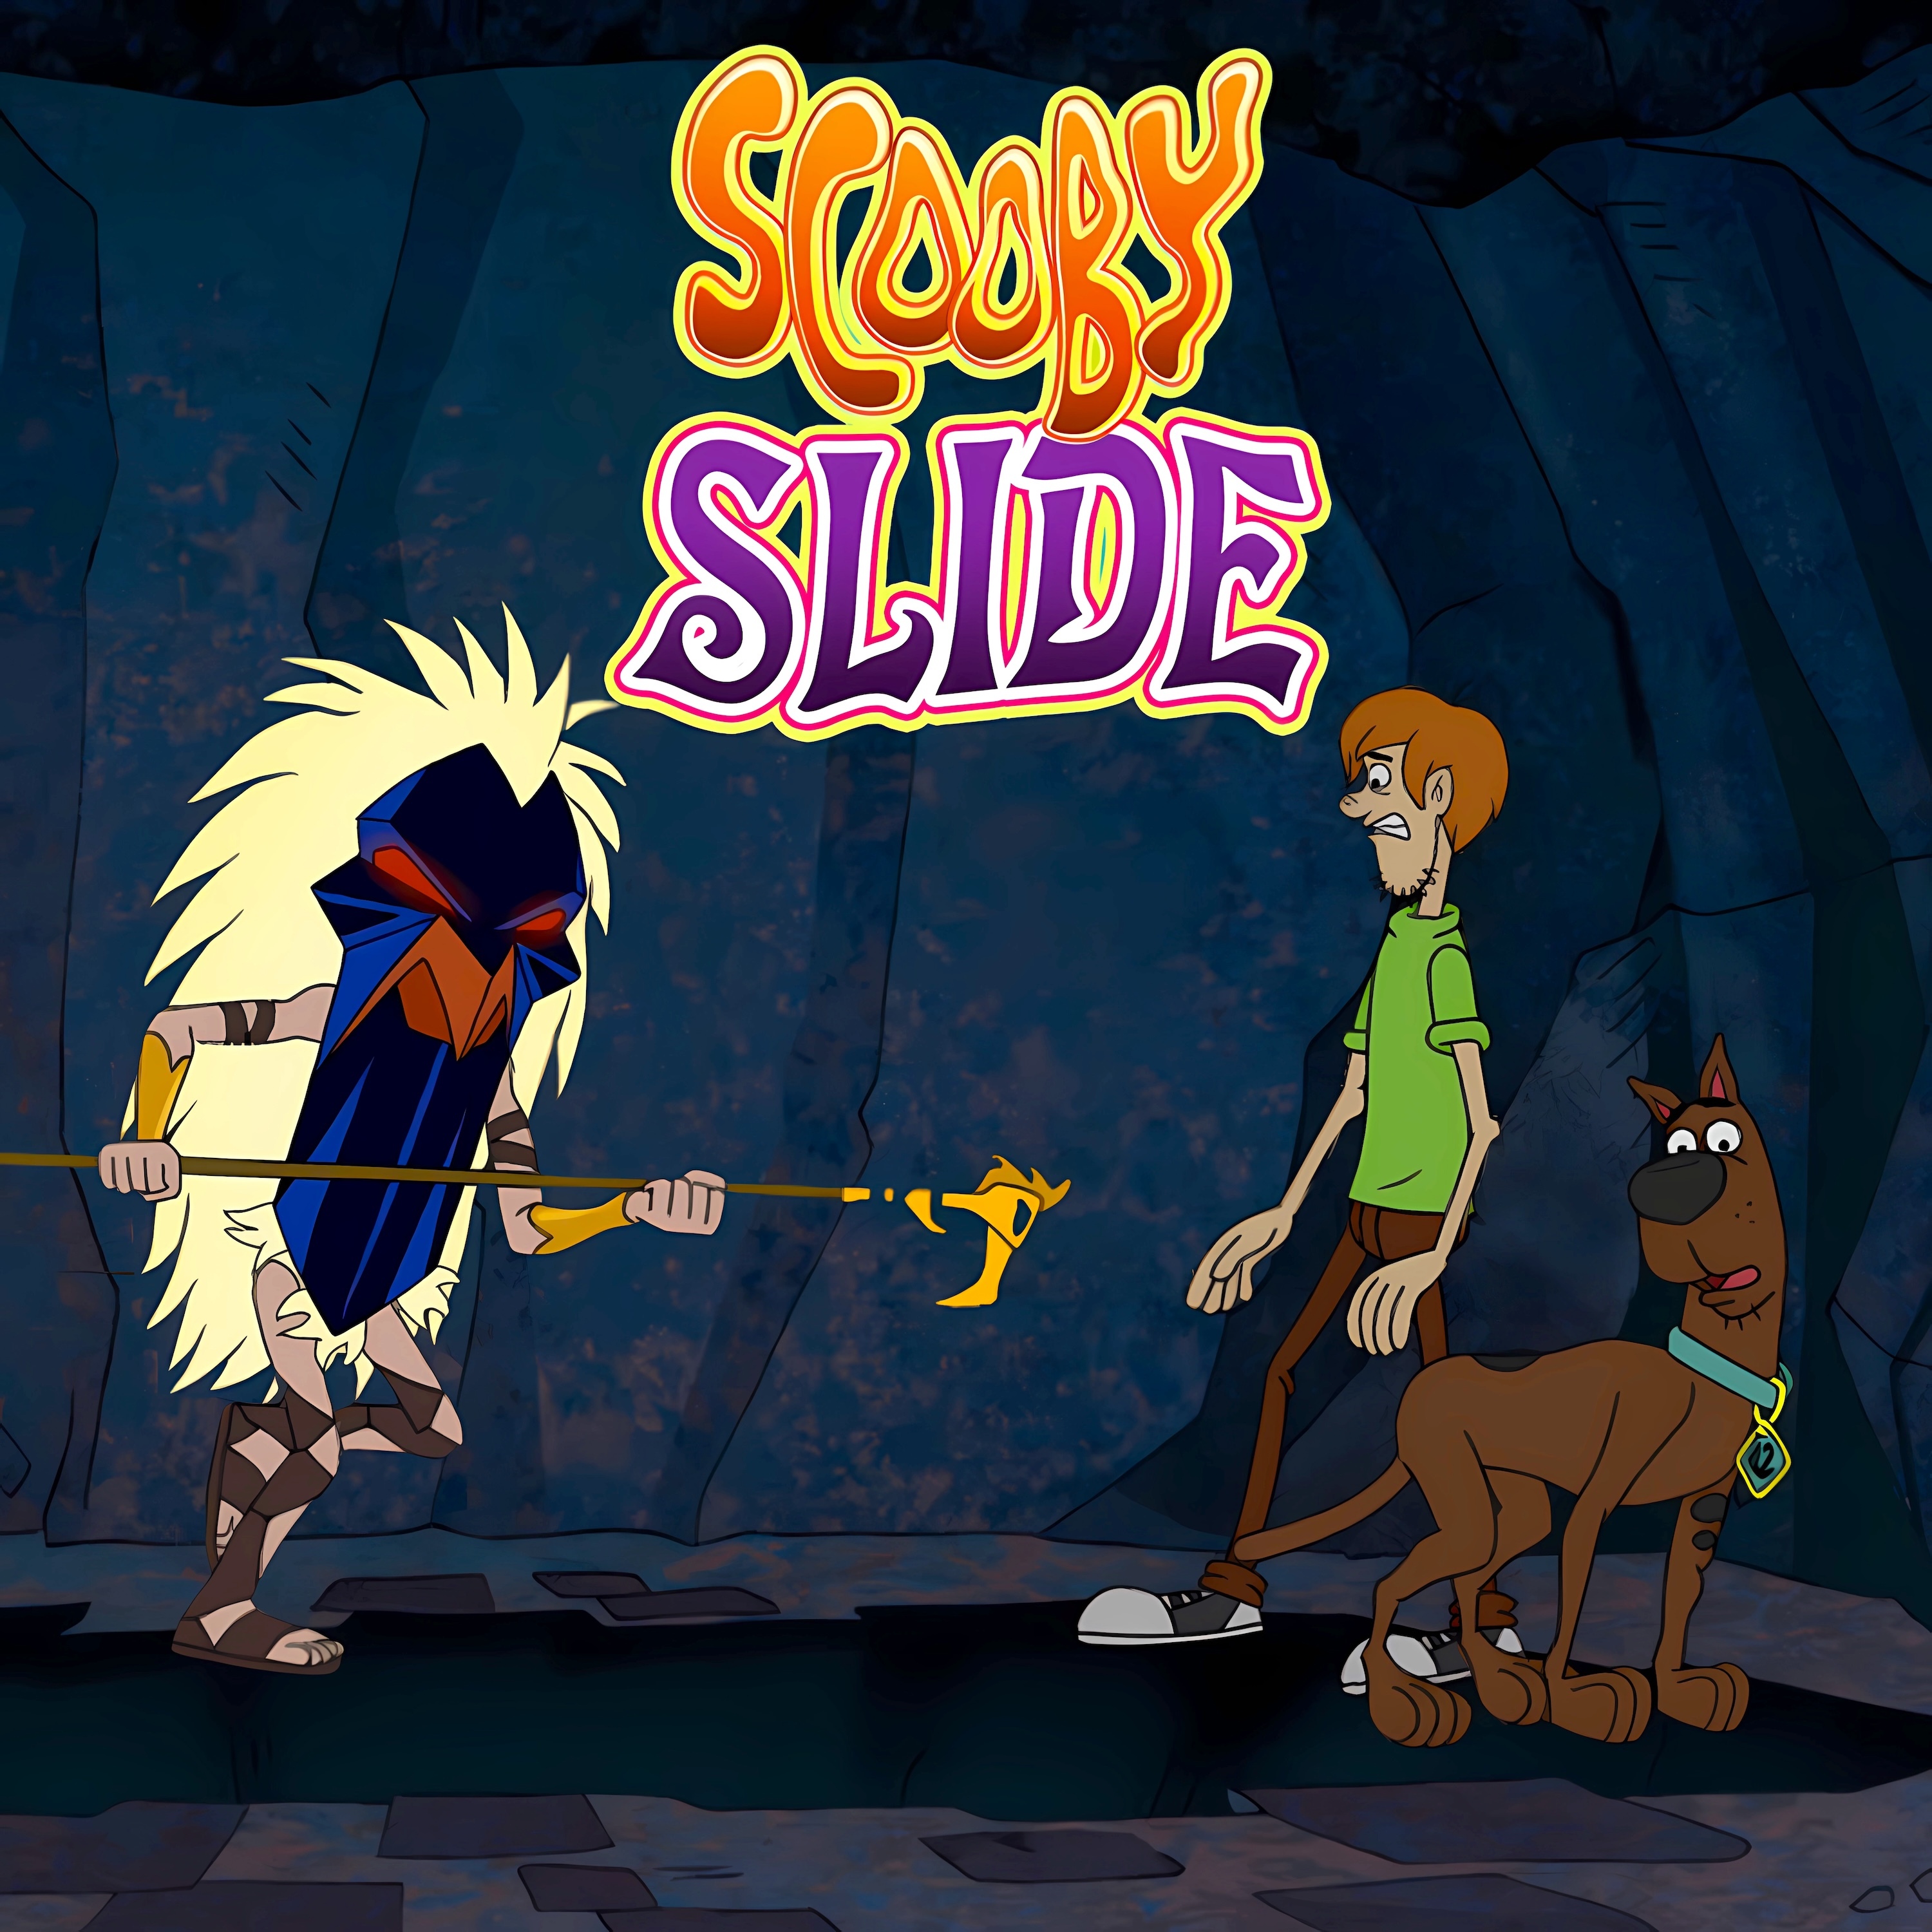 Scooby Slide - Be Cool Scooby Doo